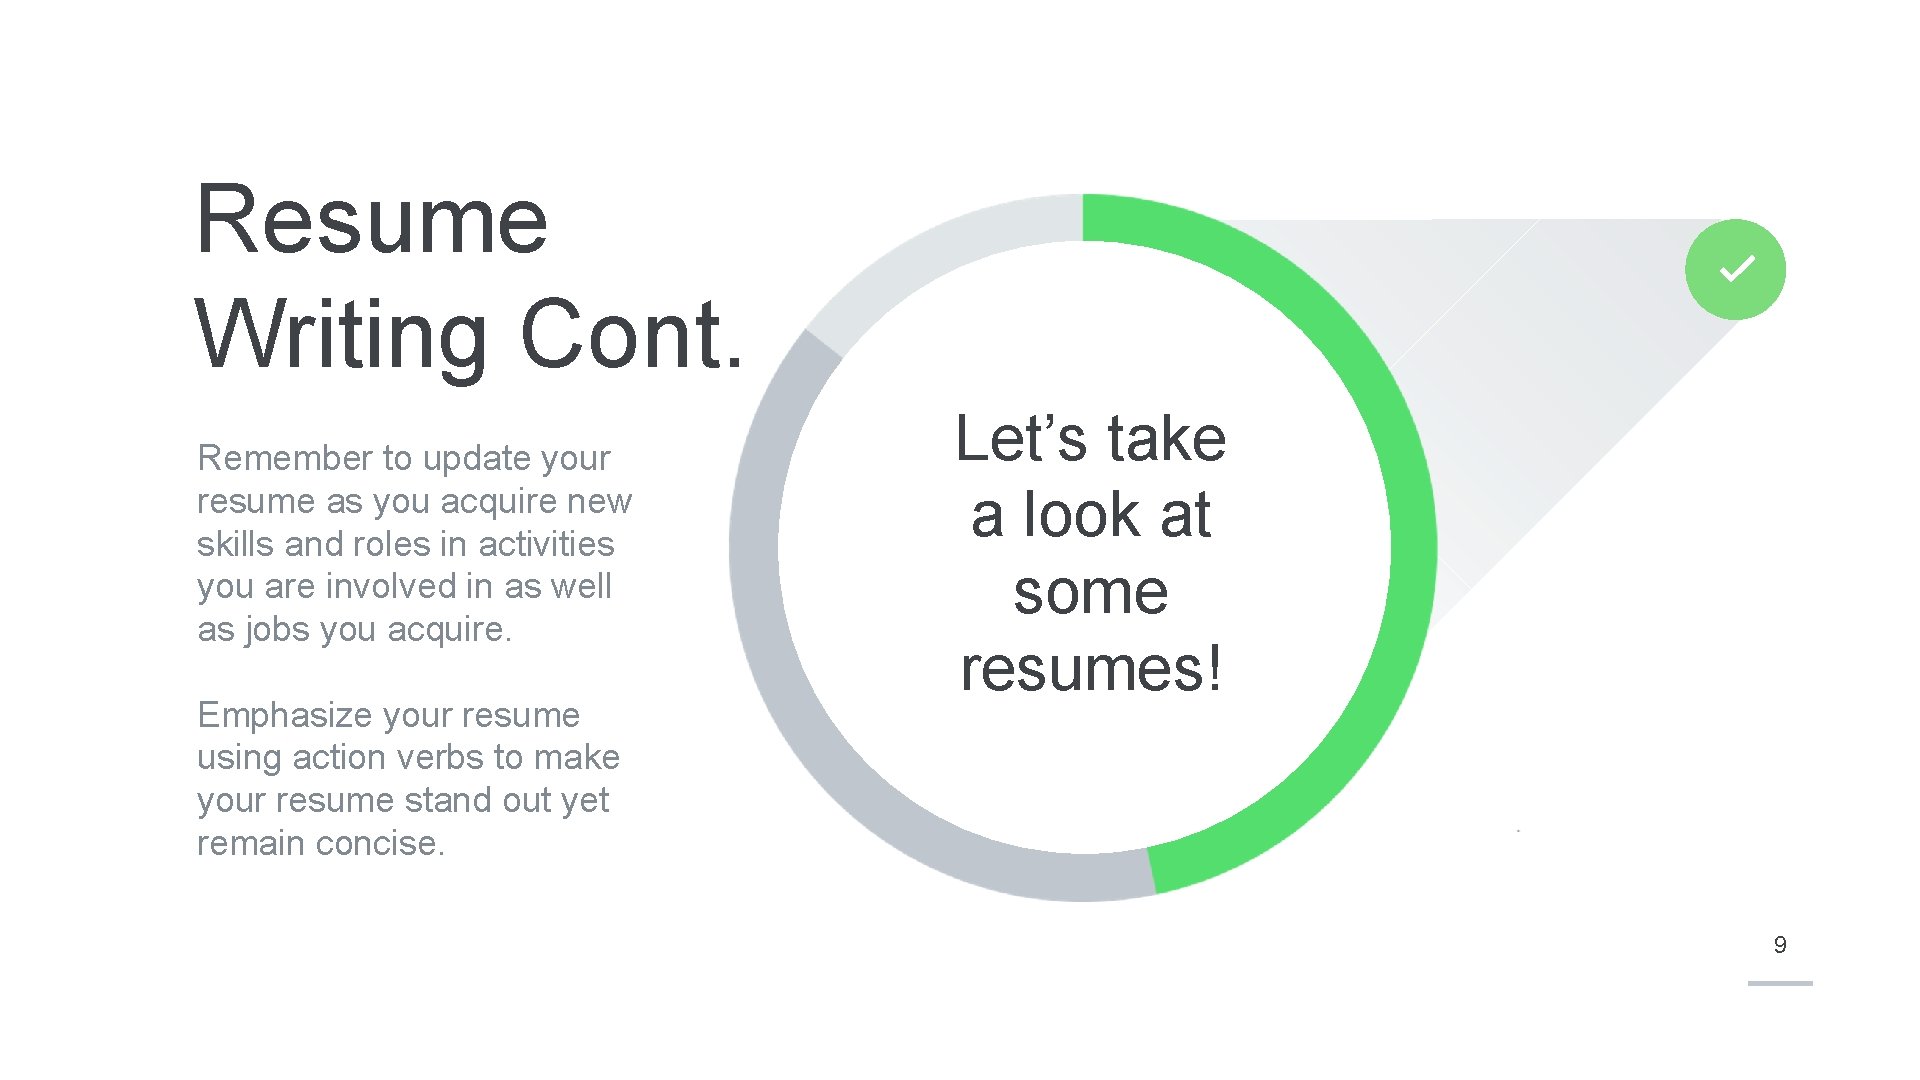 Resume Writing Cont. Remember to update your resume as you acquire new skills and